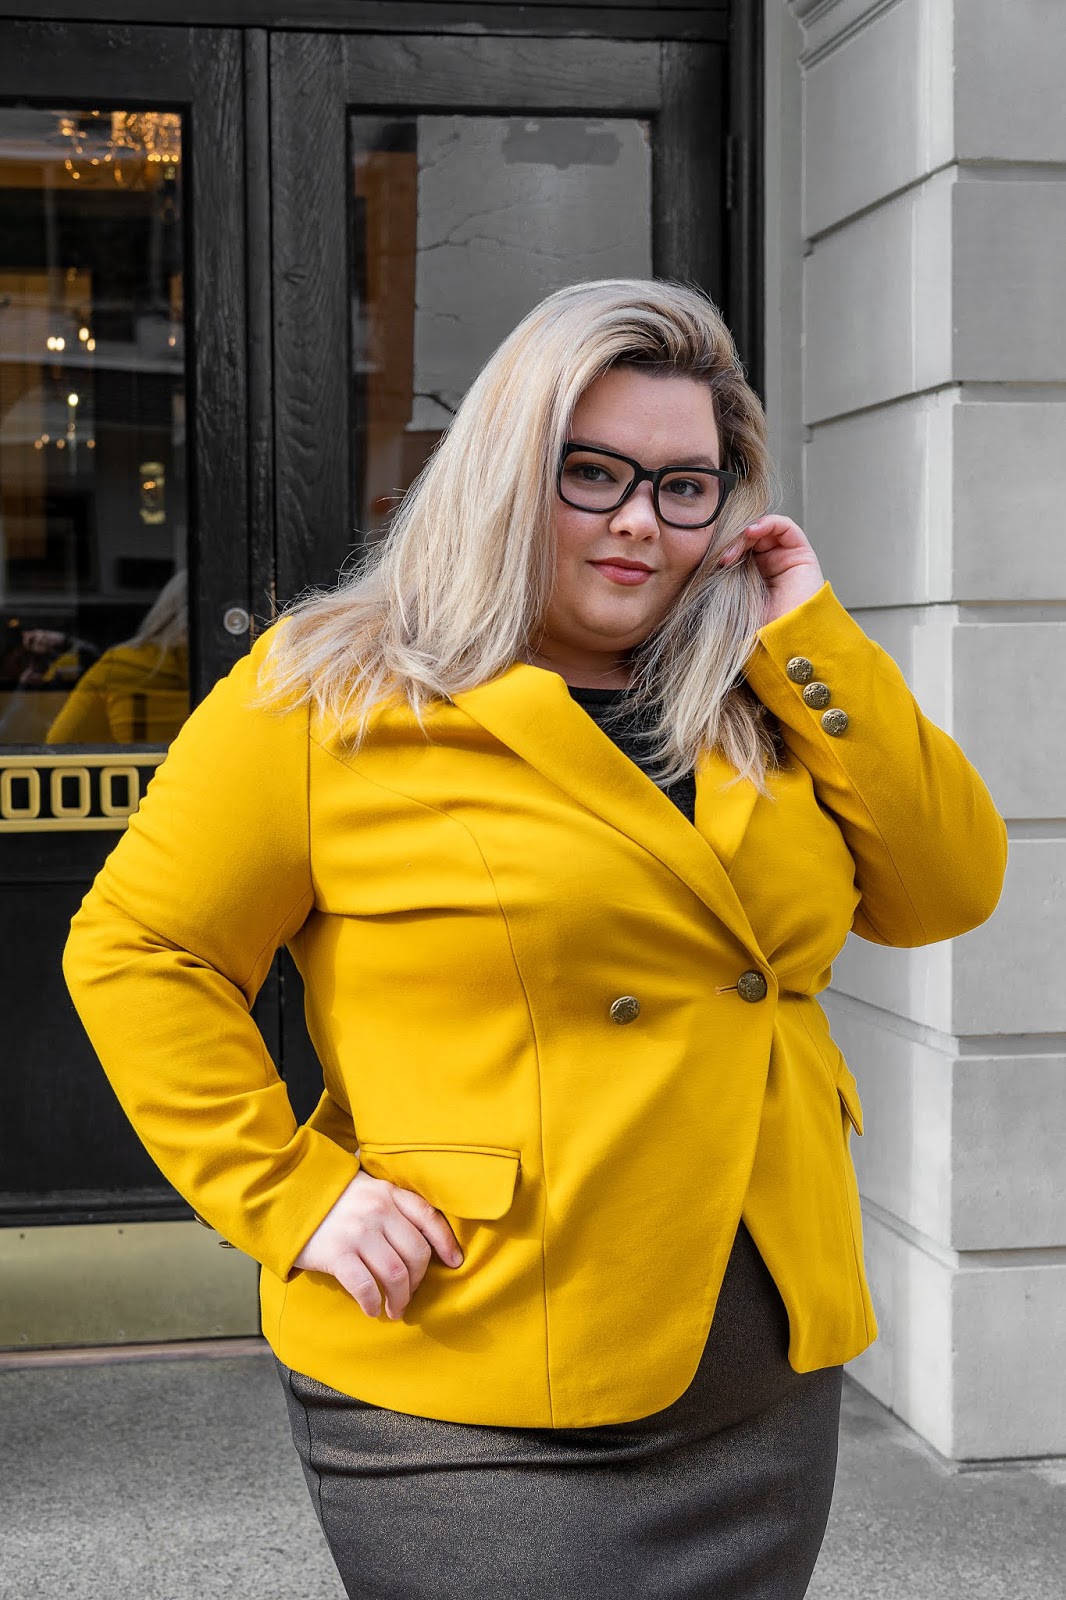 Chicago Plus Size Petite Fashion Blogger and model Natalie Craig, of Natalie in the City, reviews Marée Pour Toi's Mustard Compression Blazer and Foiled Scuba Skirt